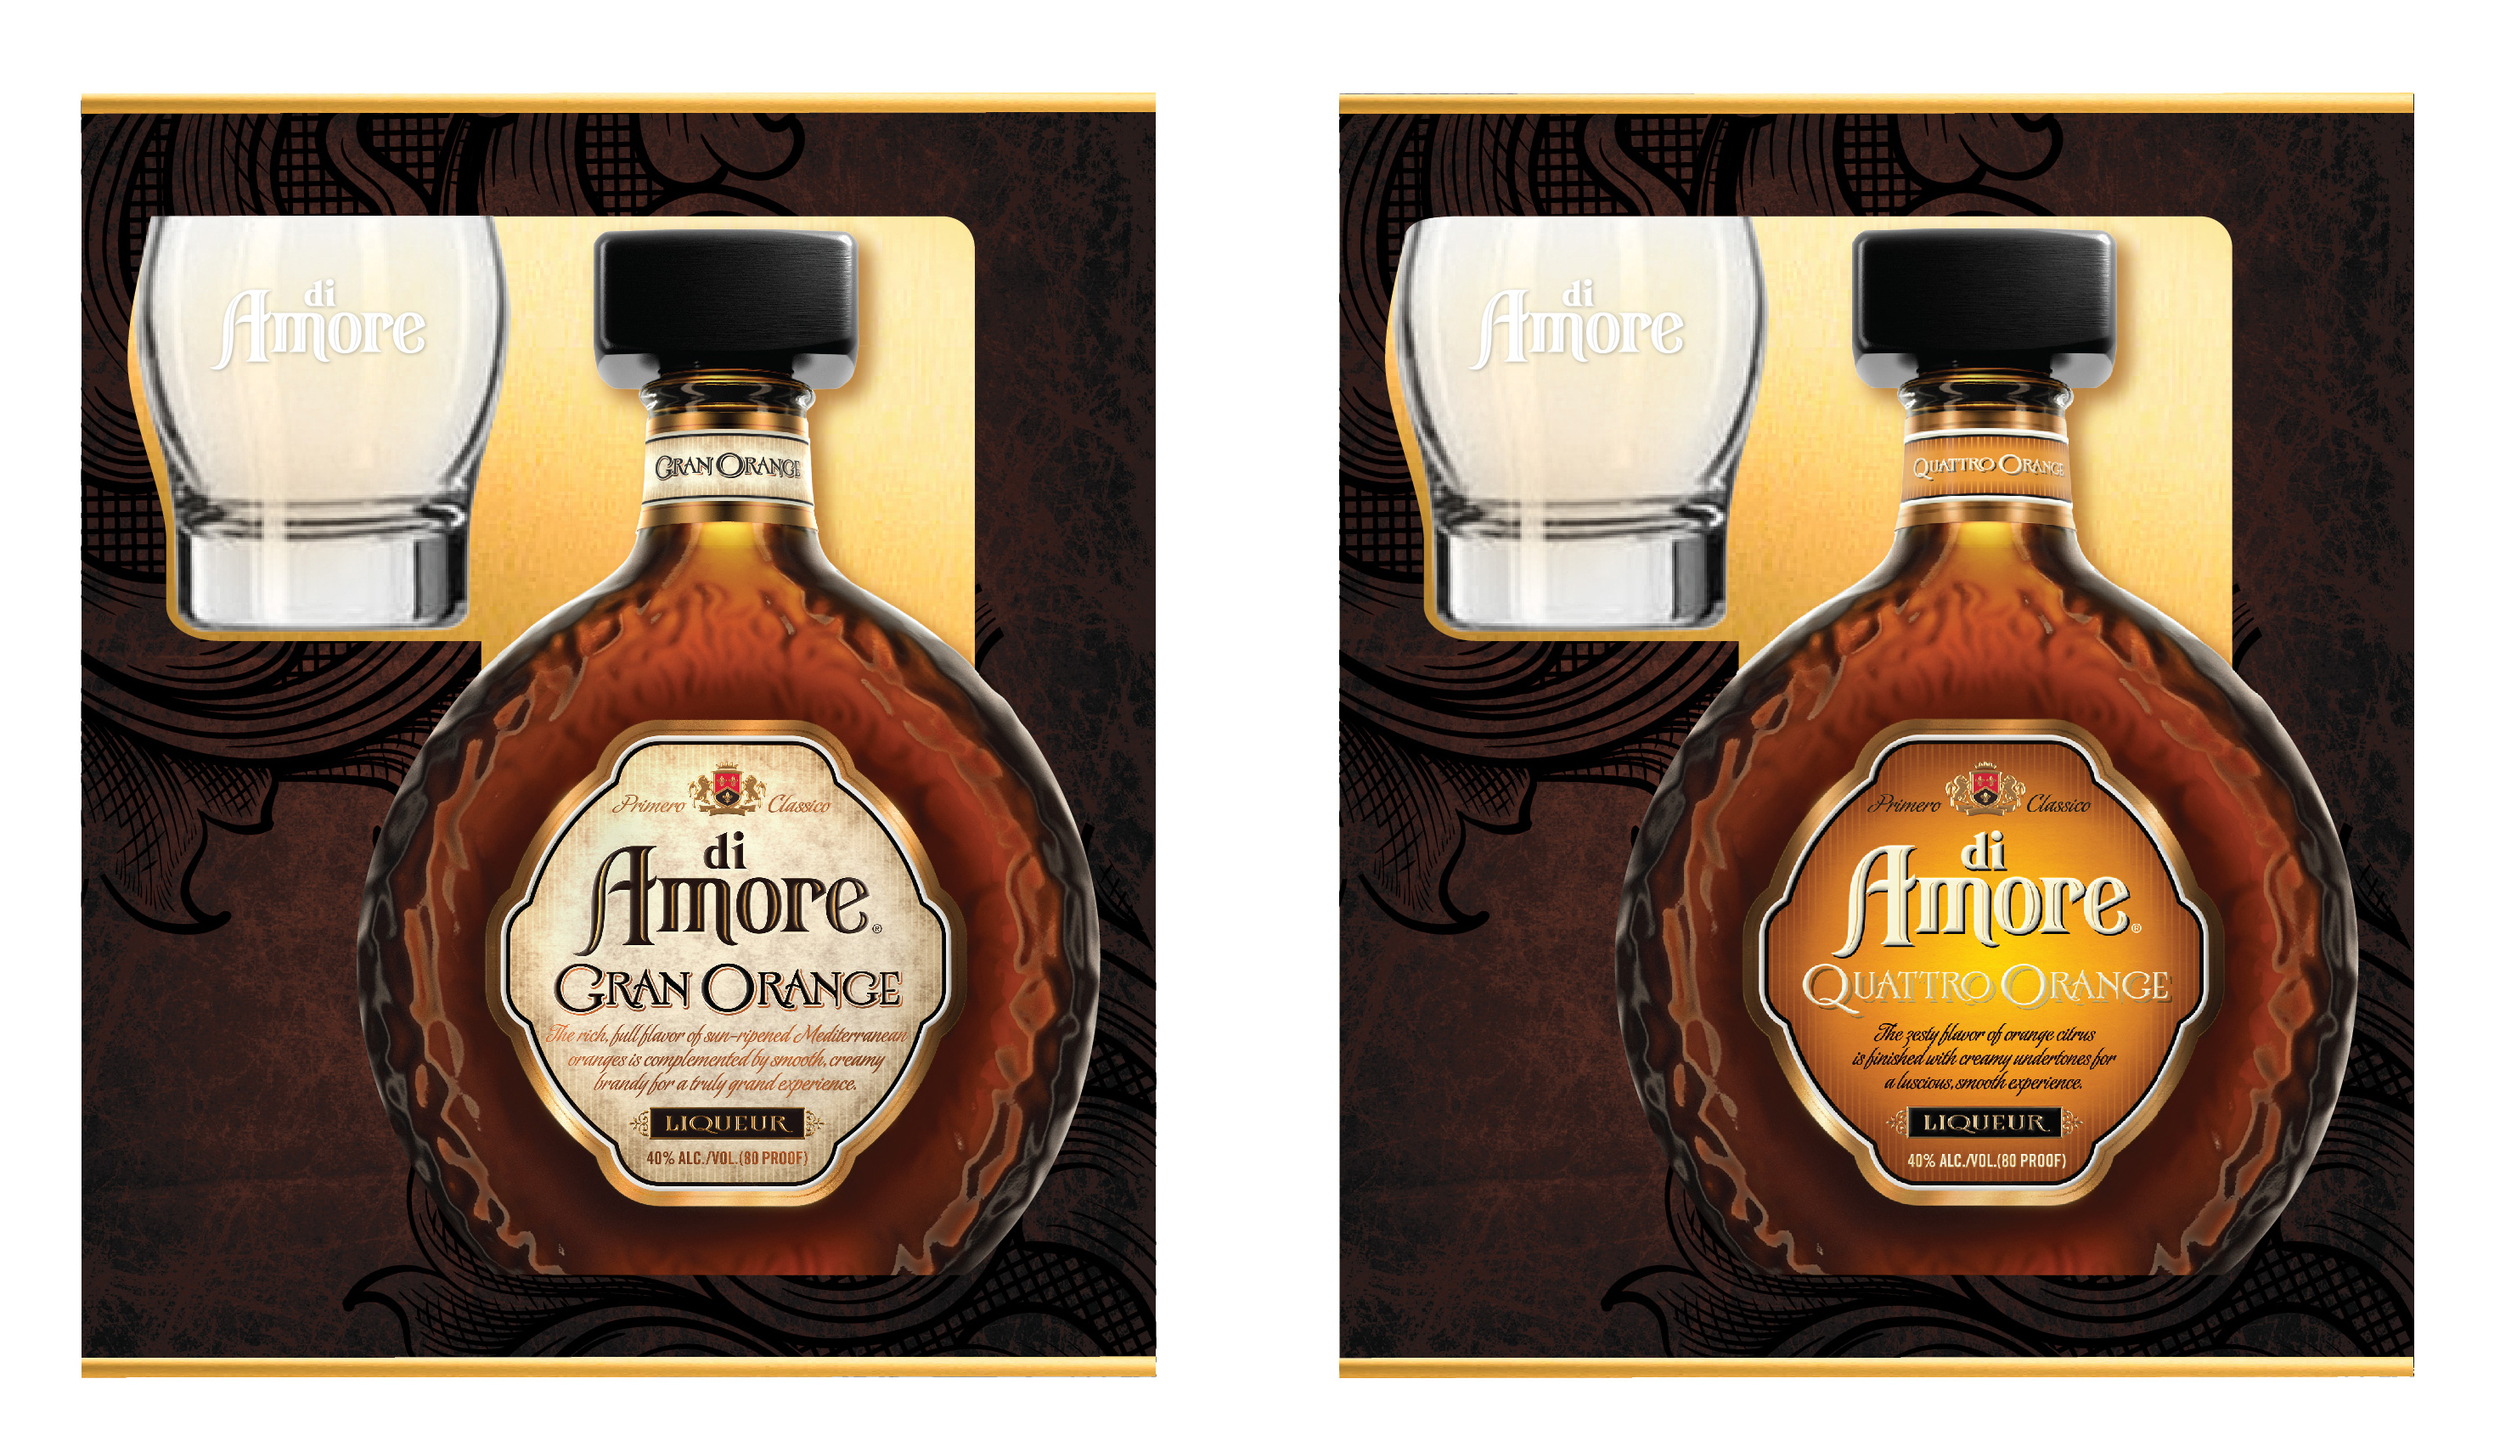  Client: Trinity Branding / di Amore Brandy  Assignment: Composite Adobe Illustrator mechanical elements and photography into final presentation image. 